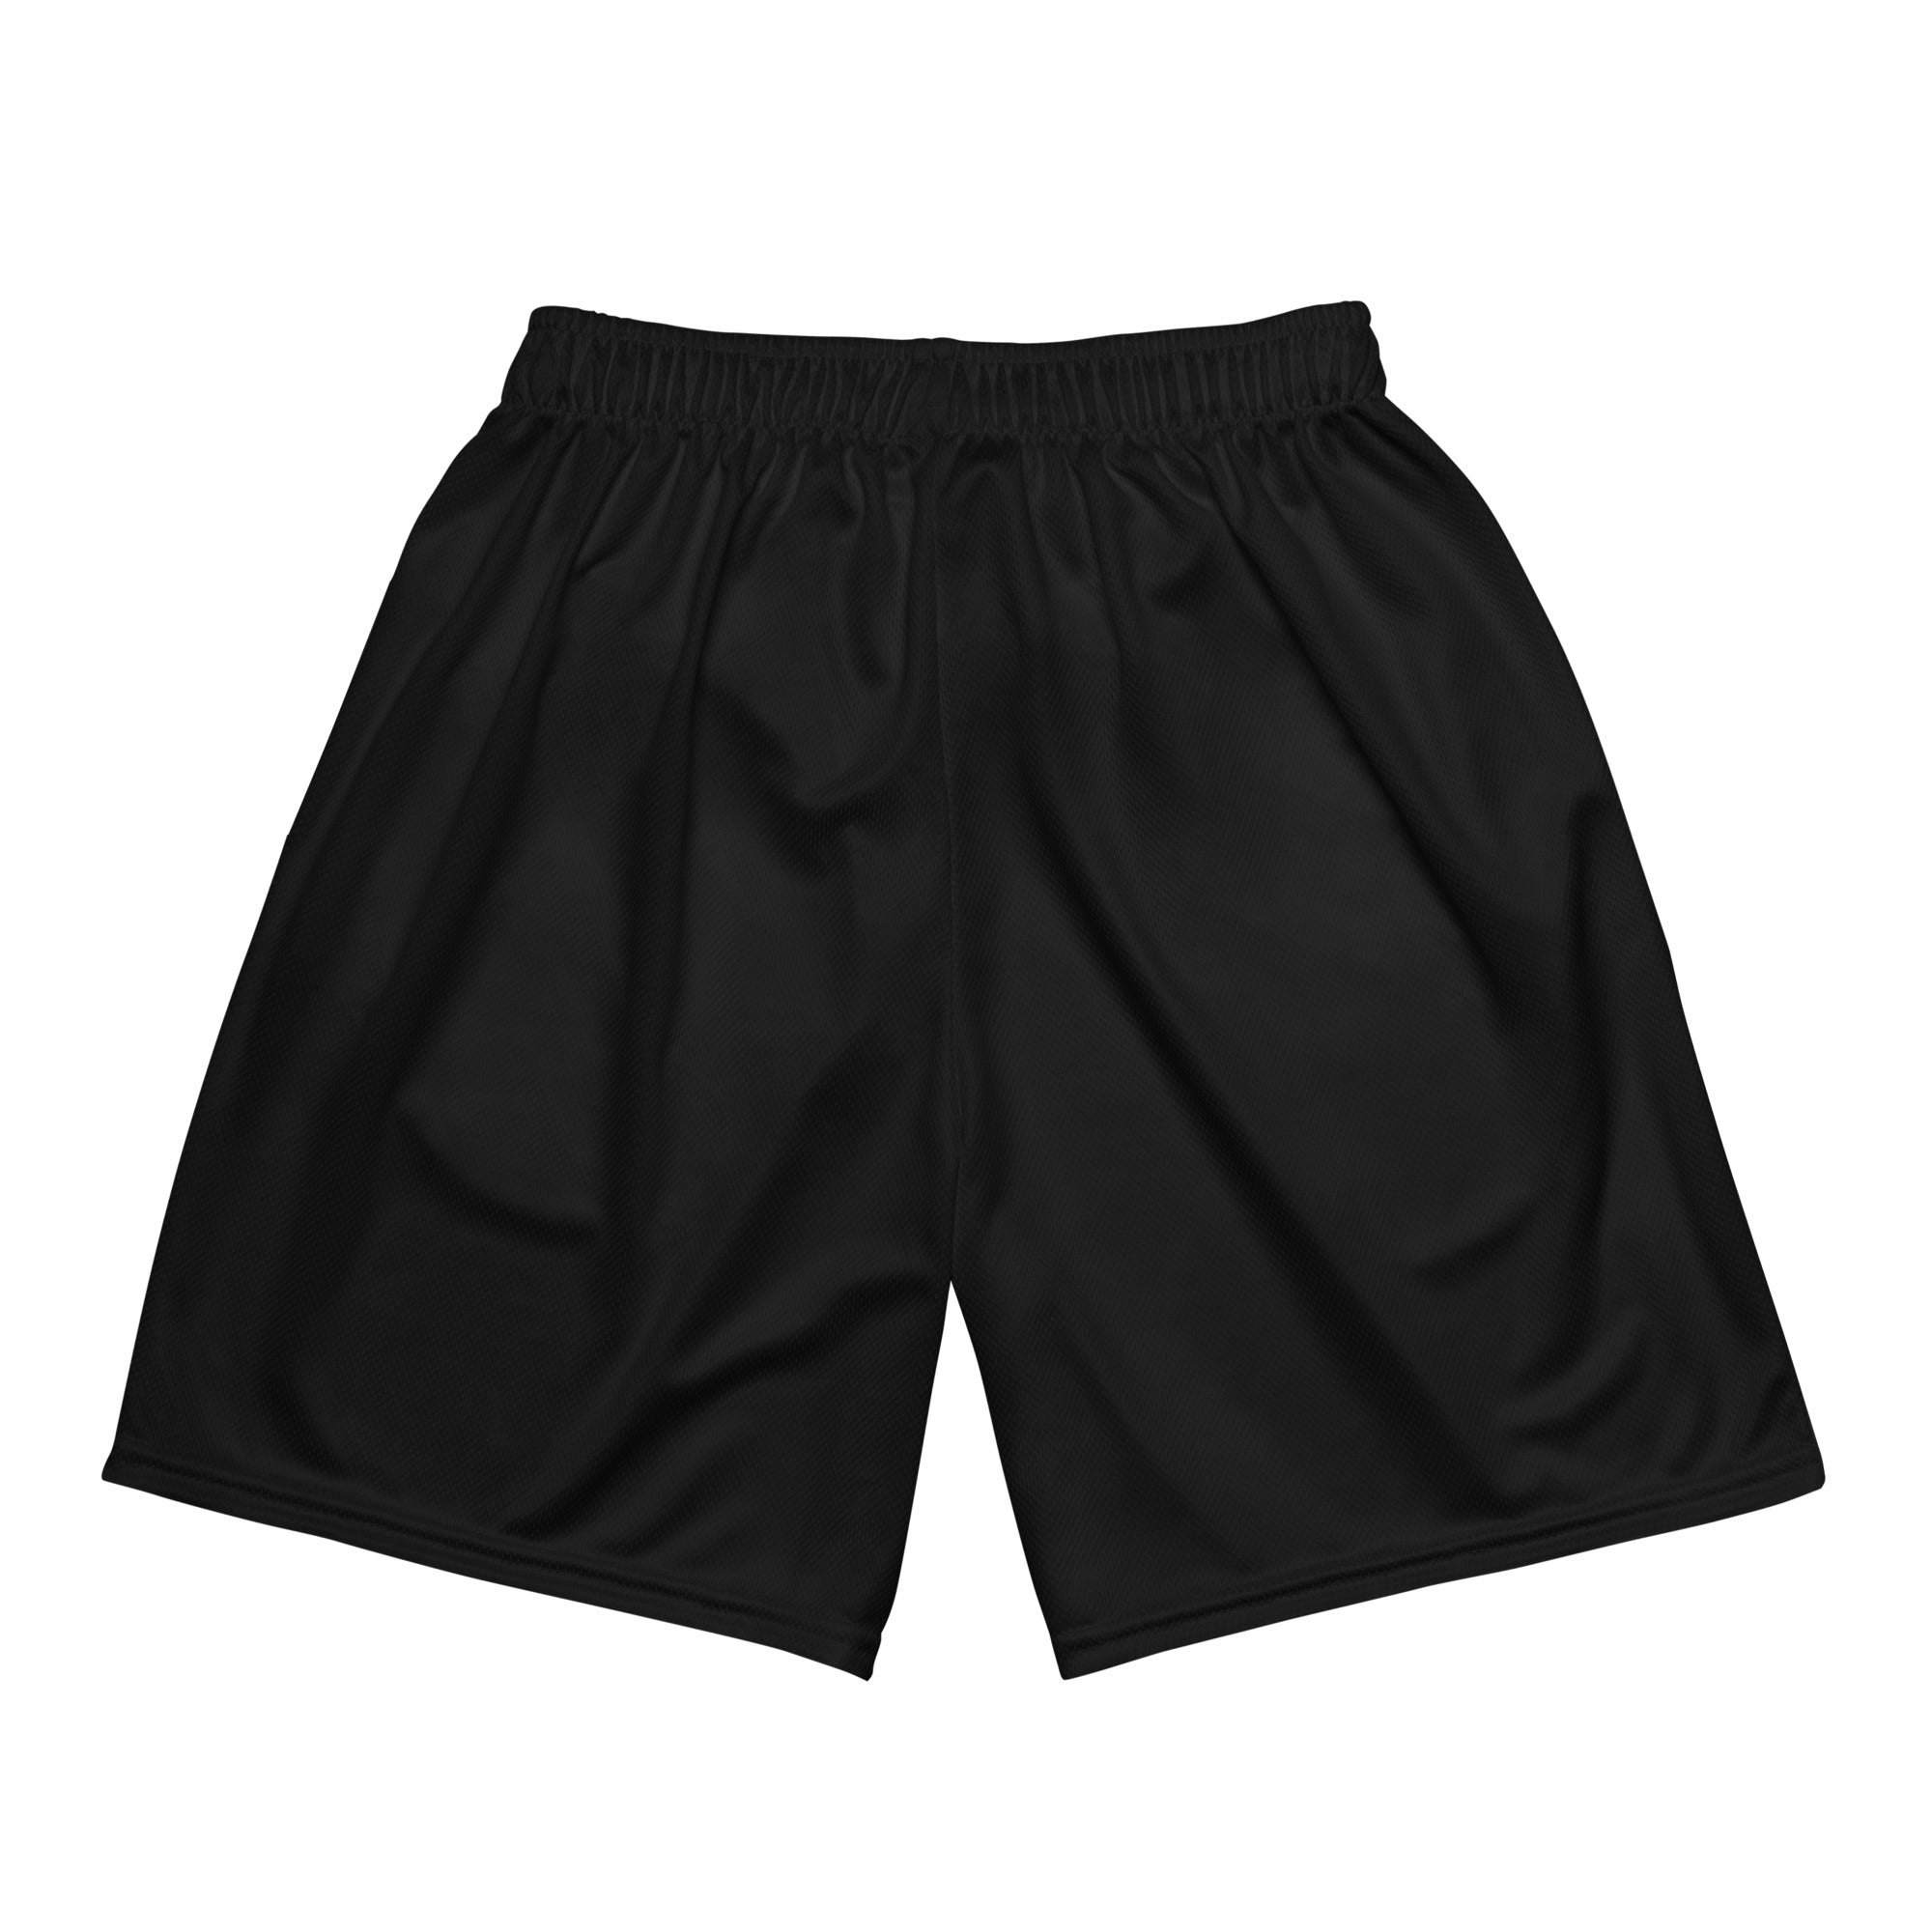 Deadly'N'Devoted mesh shorts